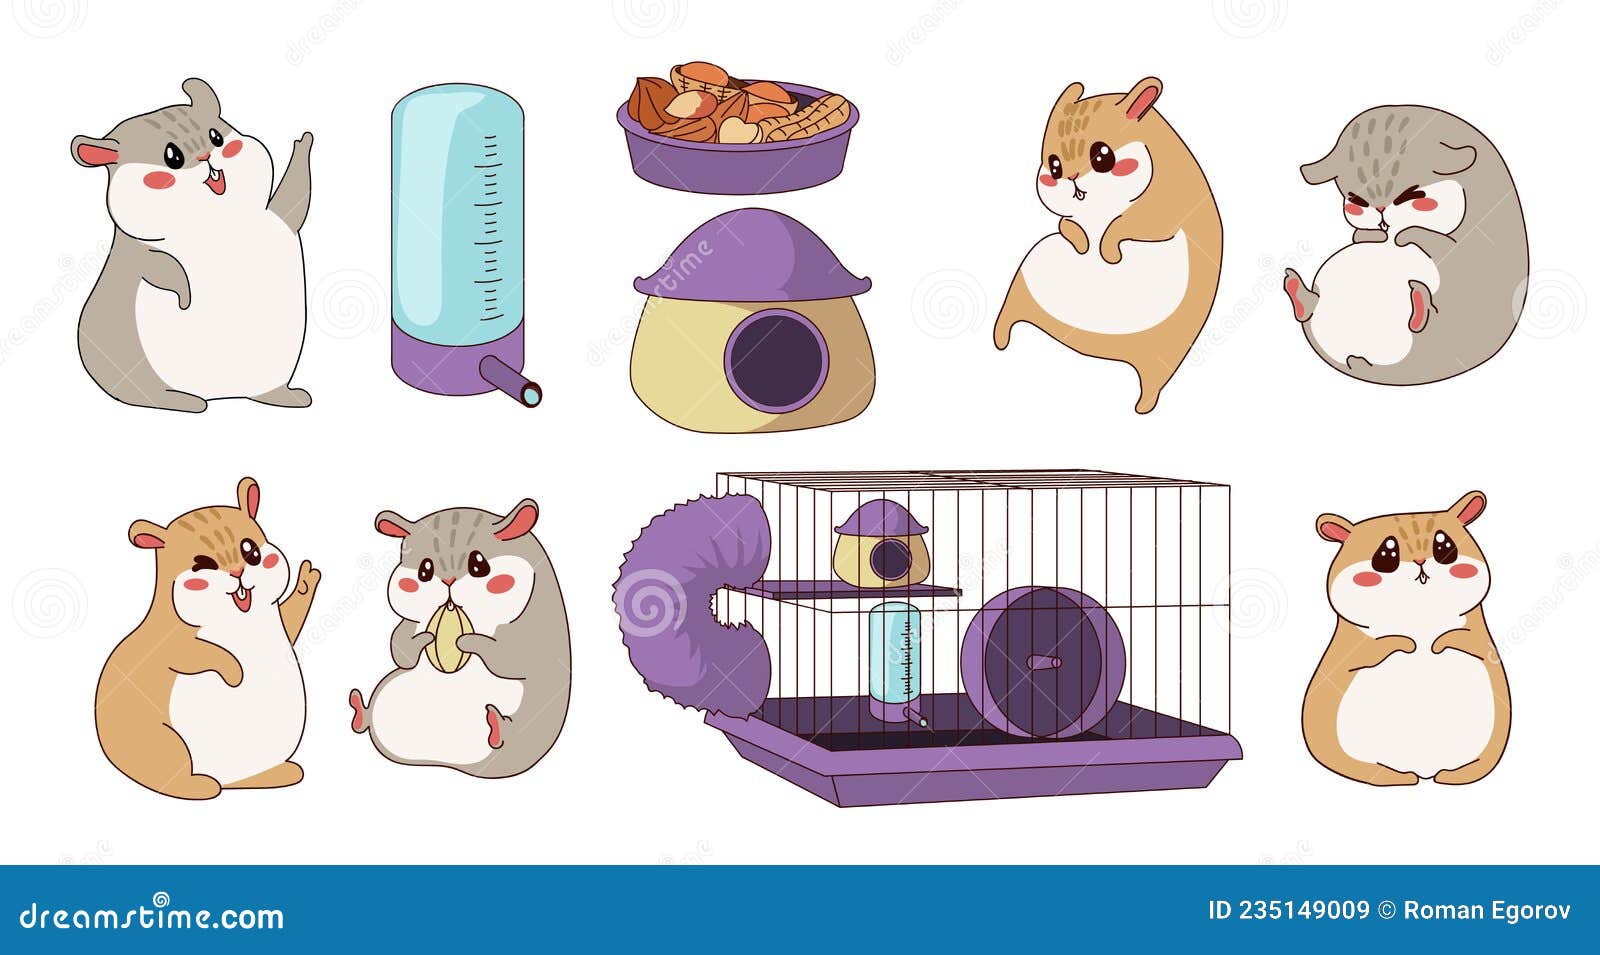 hamster character. cartoon curious pet with cage and wheel. feeder or drinker. domestic rodent poses and expressions